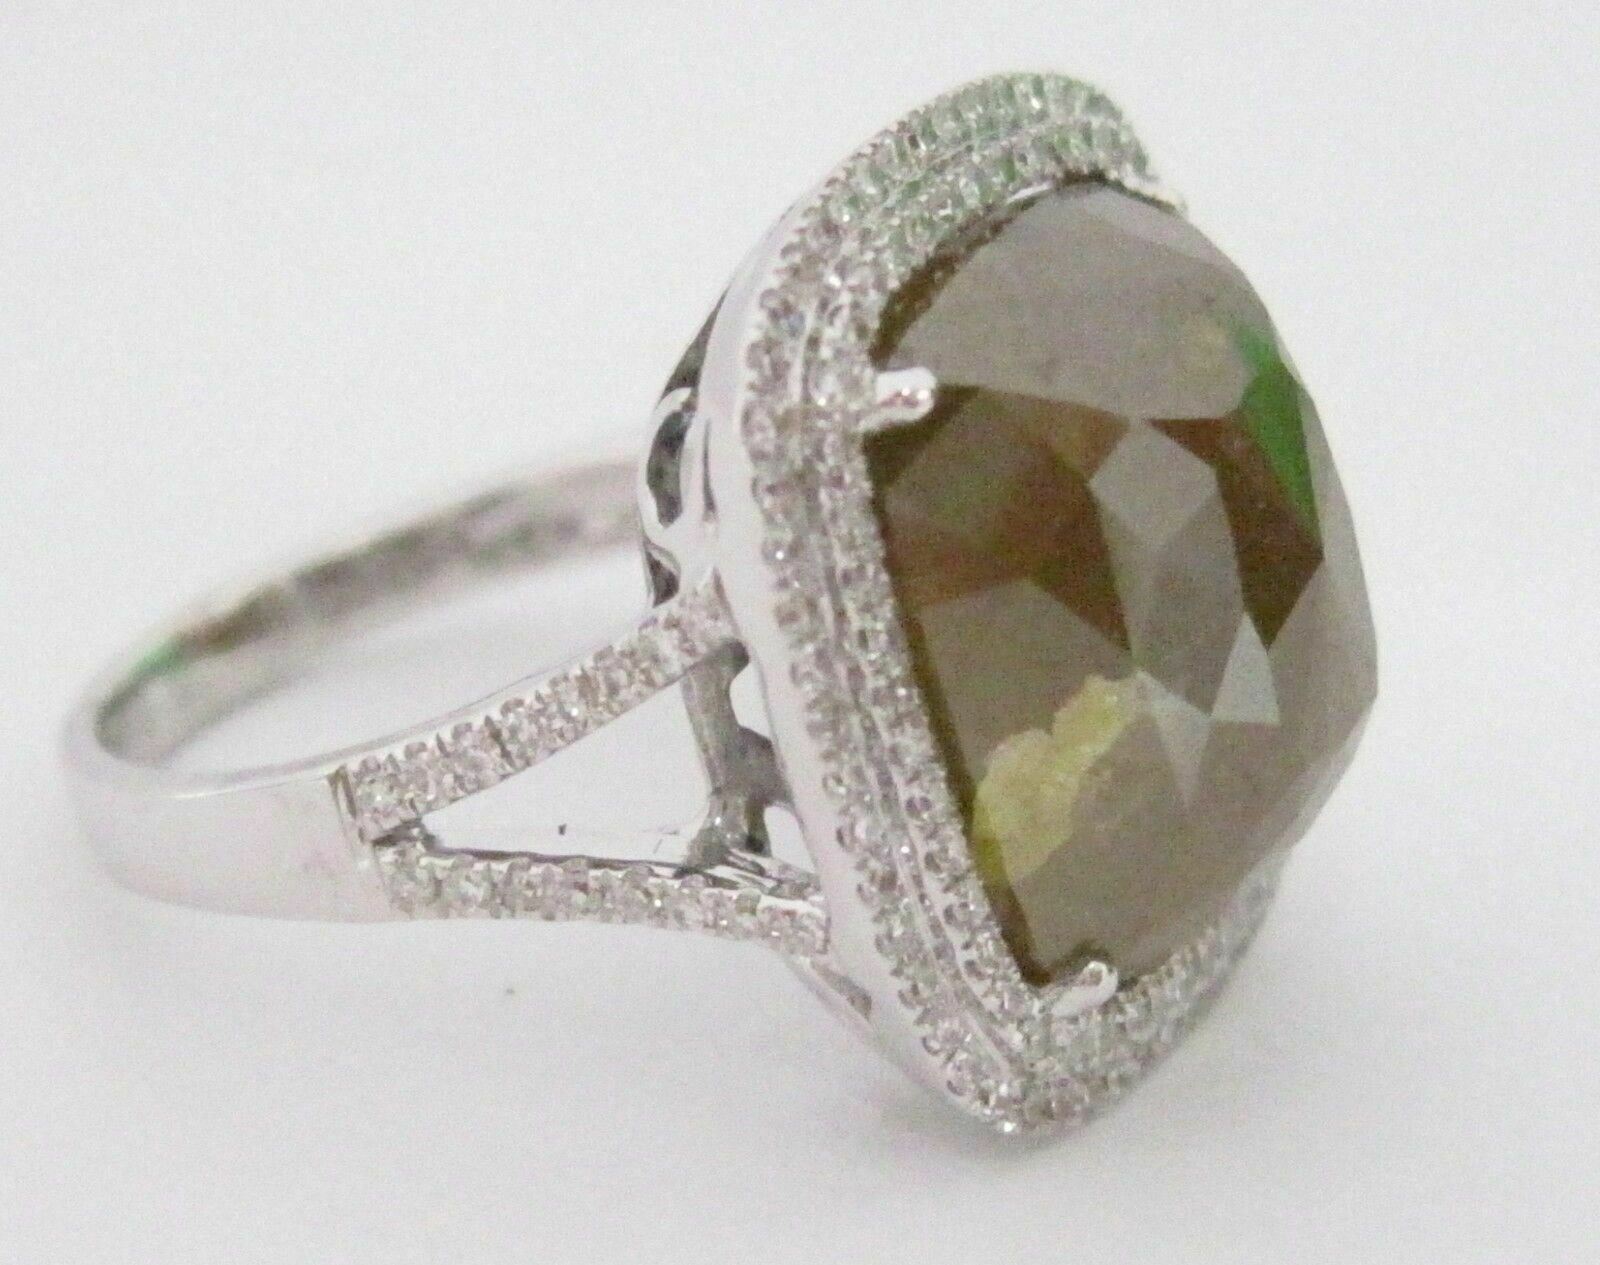 7.83 TCW Natural Solitaire Cushion Facet Colored Diamond Ring 14k W/G Size 6.5